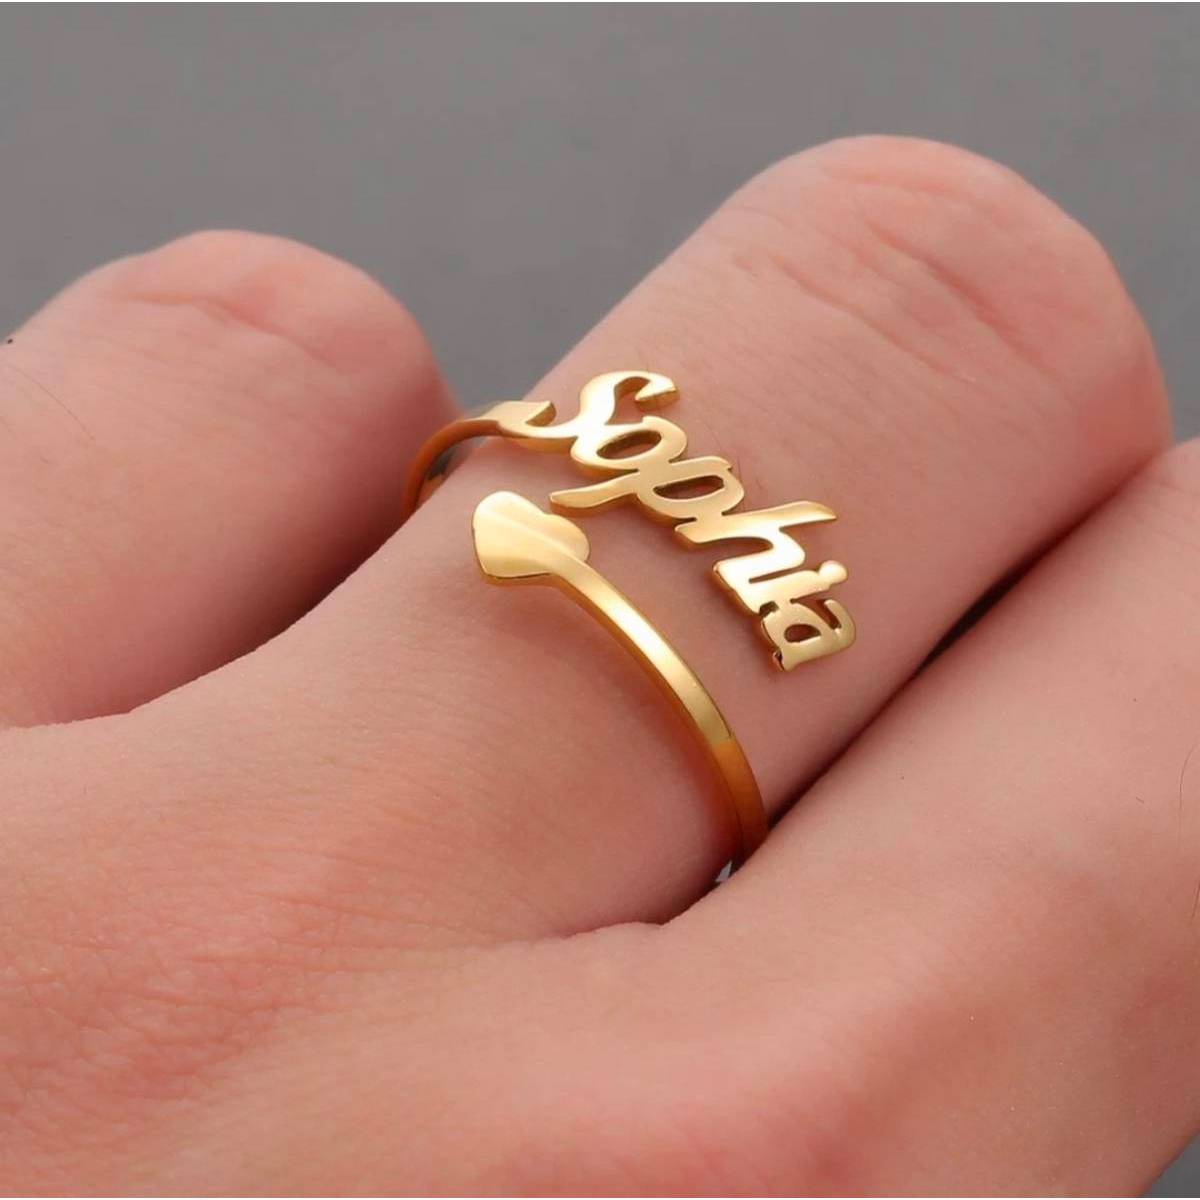 Adjustable Custom Ring Personalized Letter